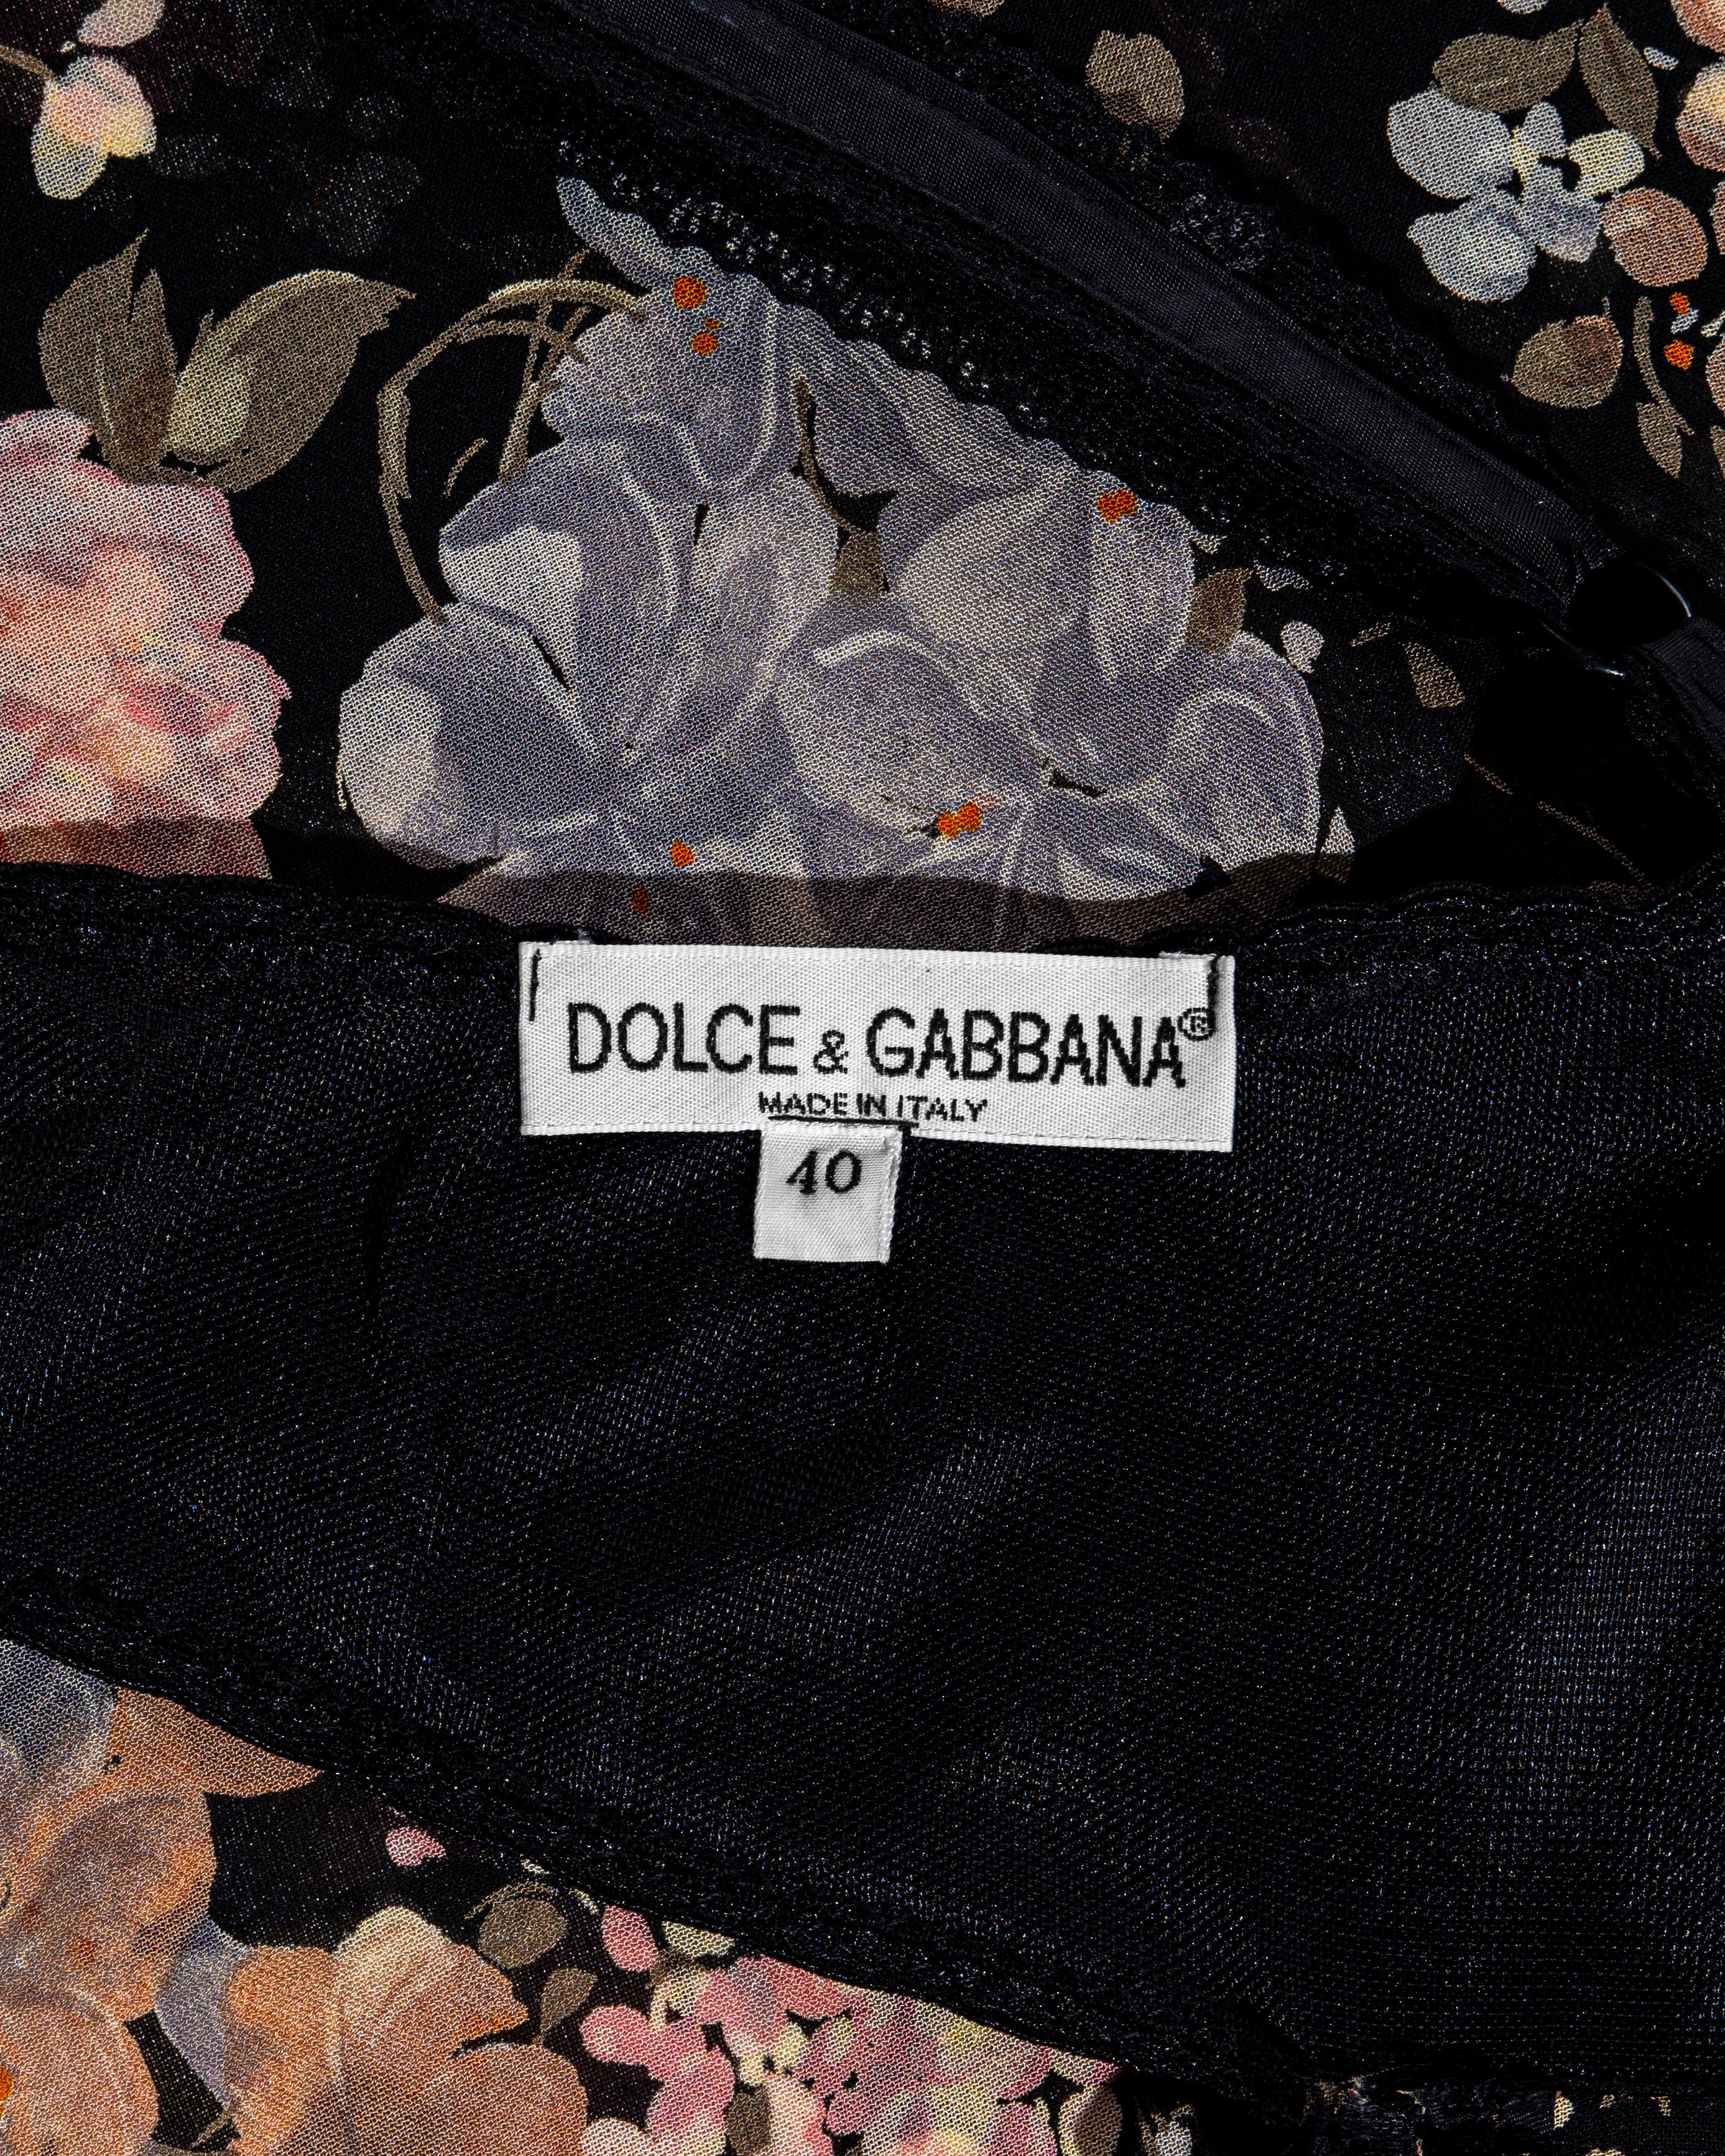 Dolce & Gabbana floral chiffon and lace evening slip dress, ss 1997 For Sale 4